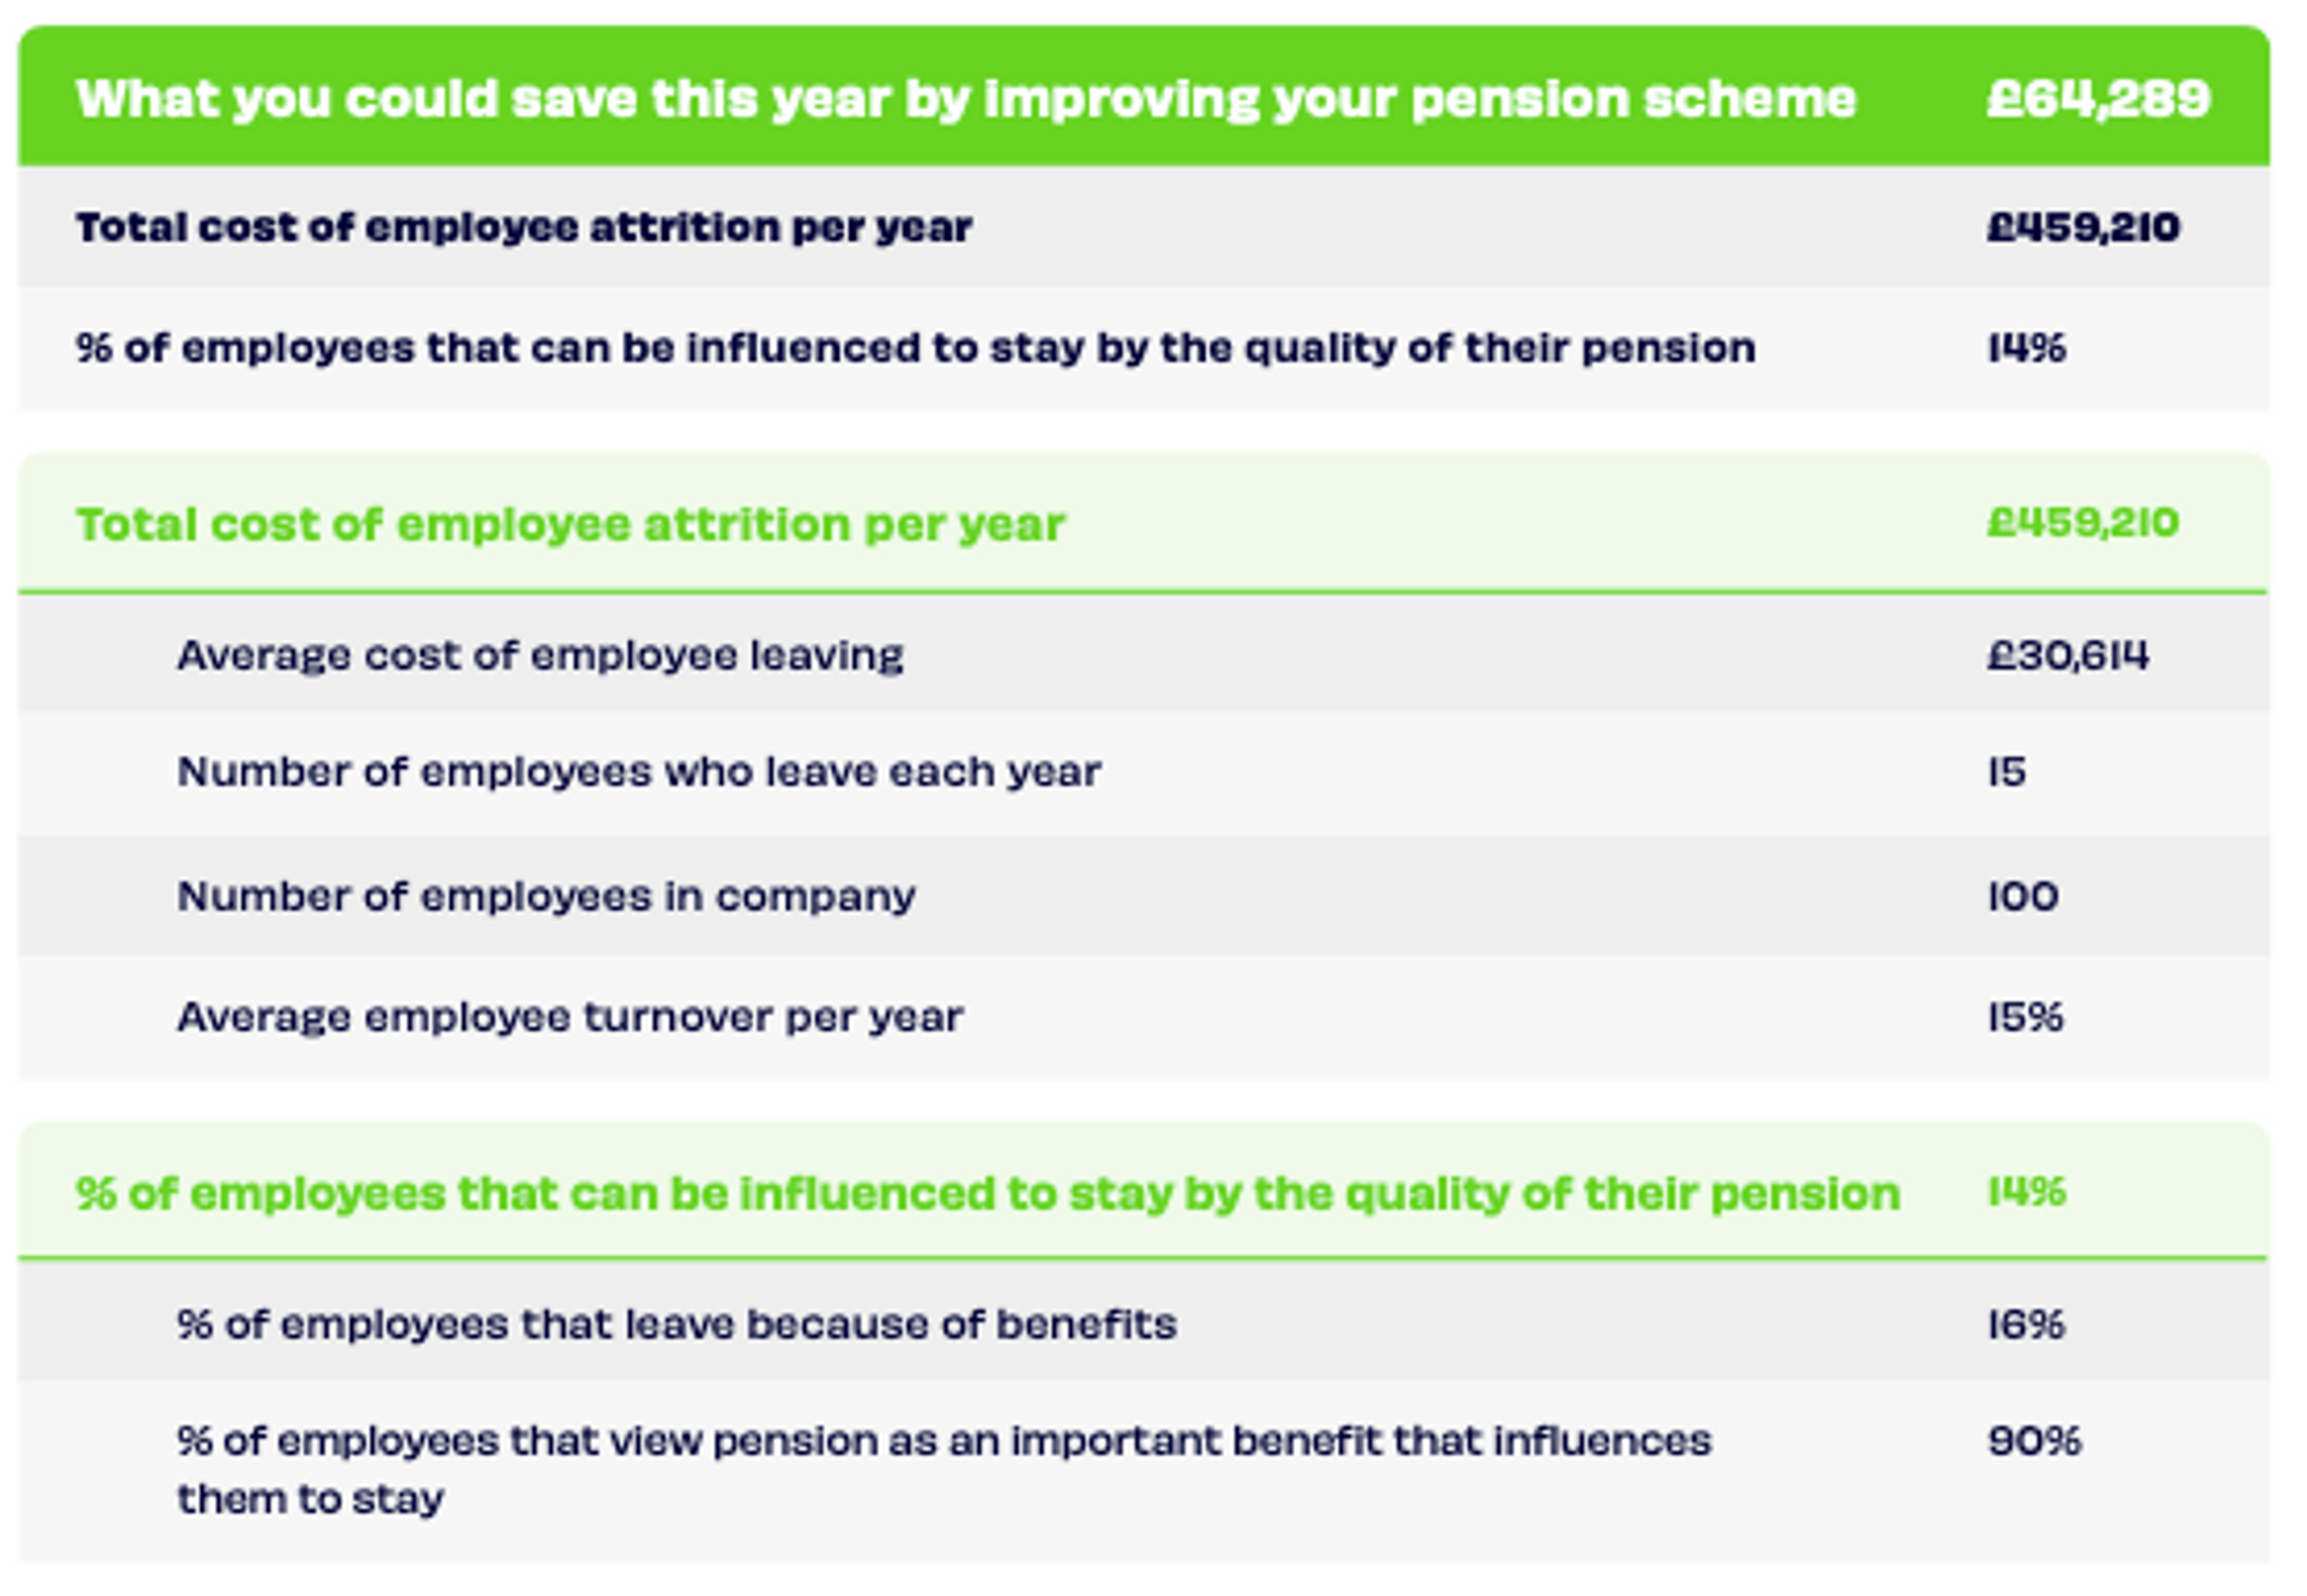 Table showing what you could save by boosting employee retention